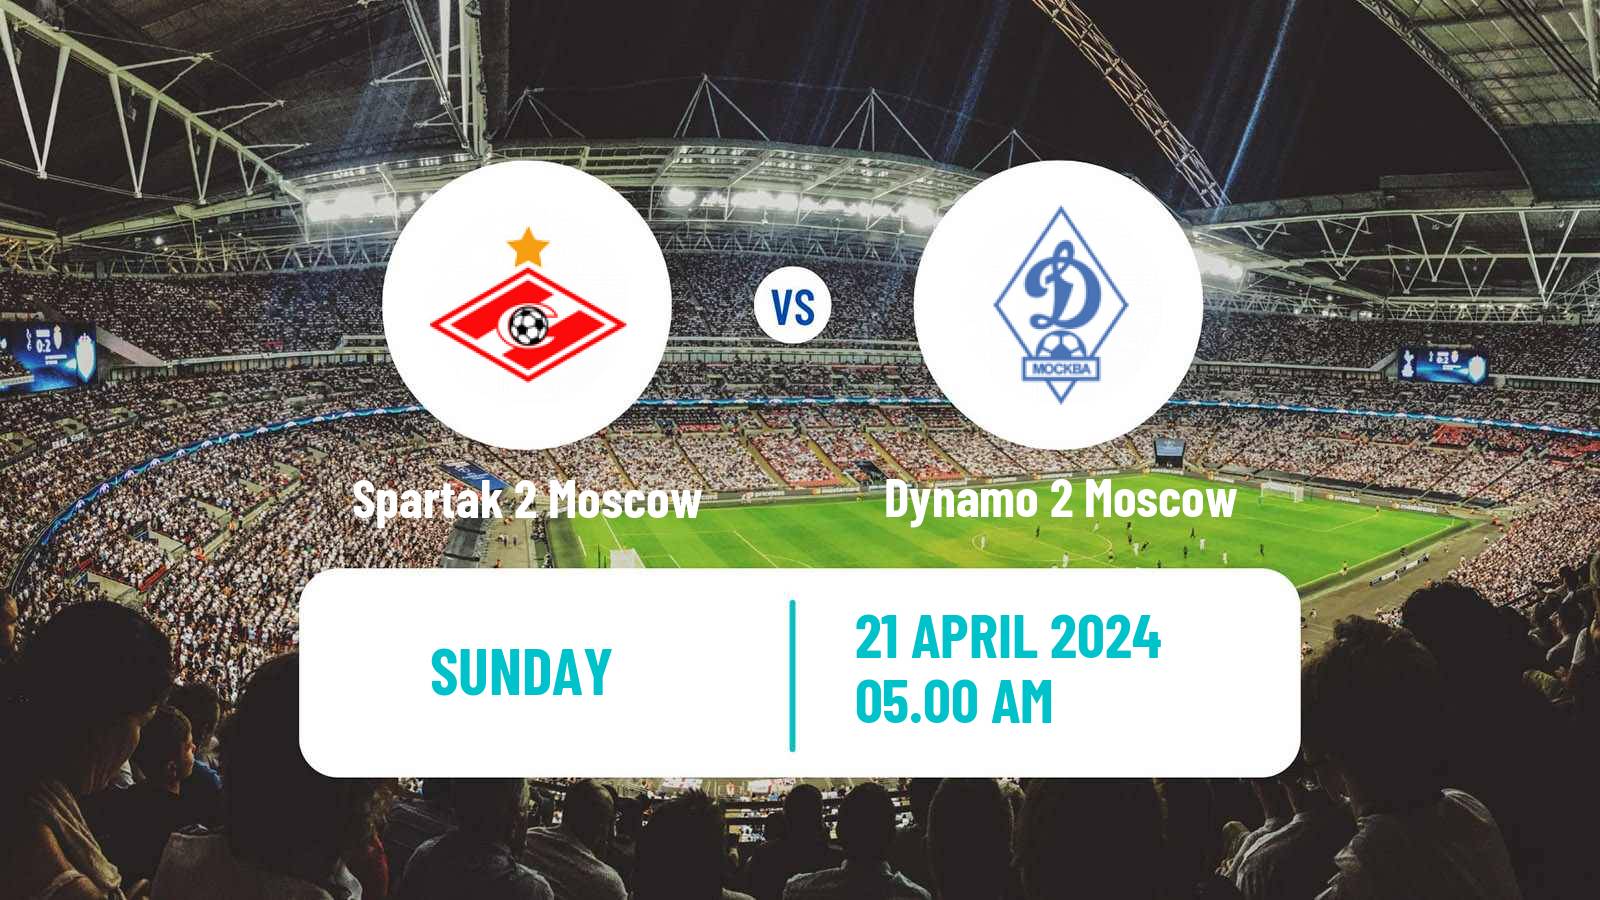 Soccer FNL 2 Division B Group 2 Spartak 2 Moscow - Dynamo 2 Moscow